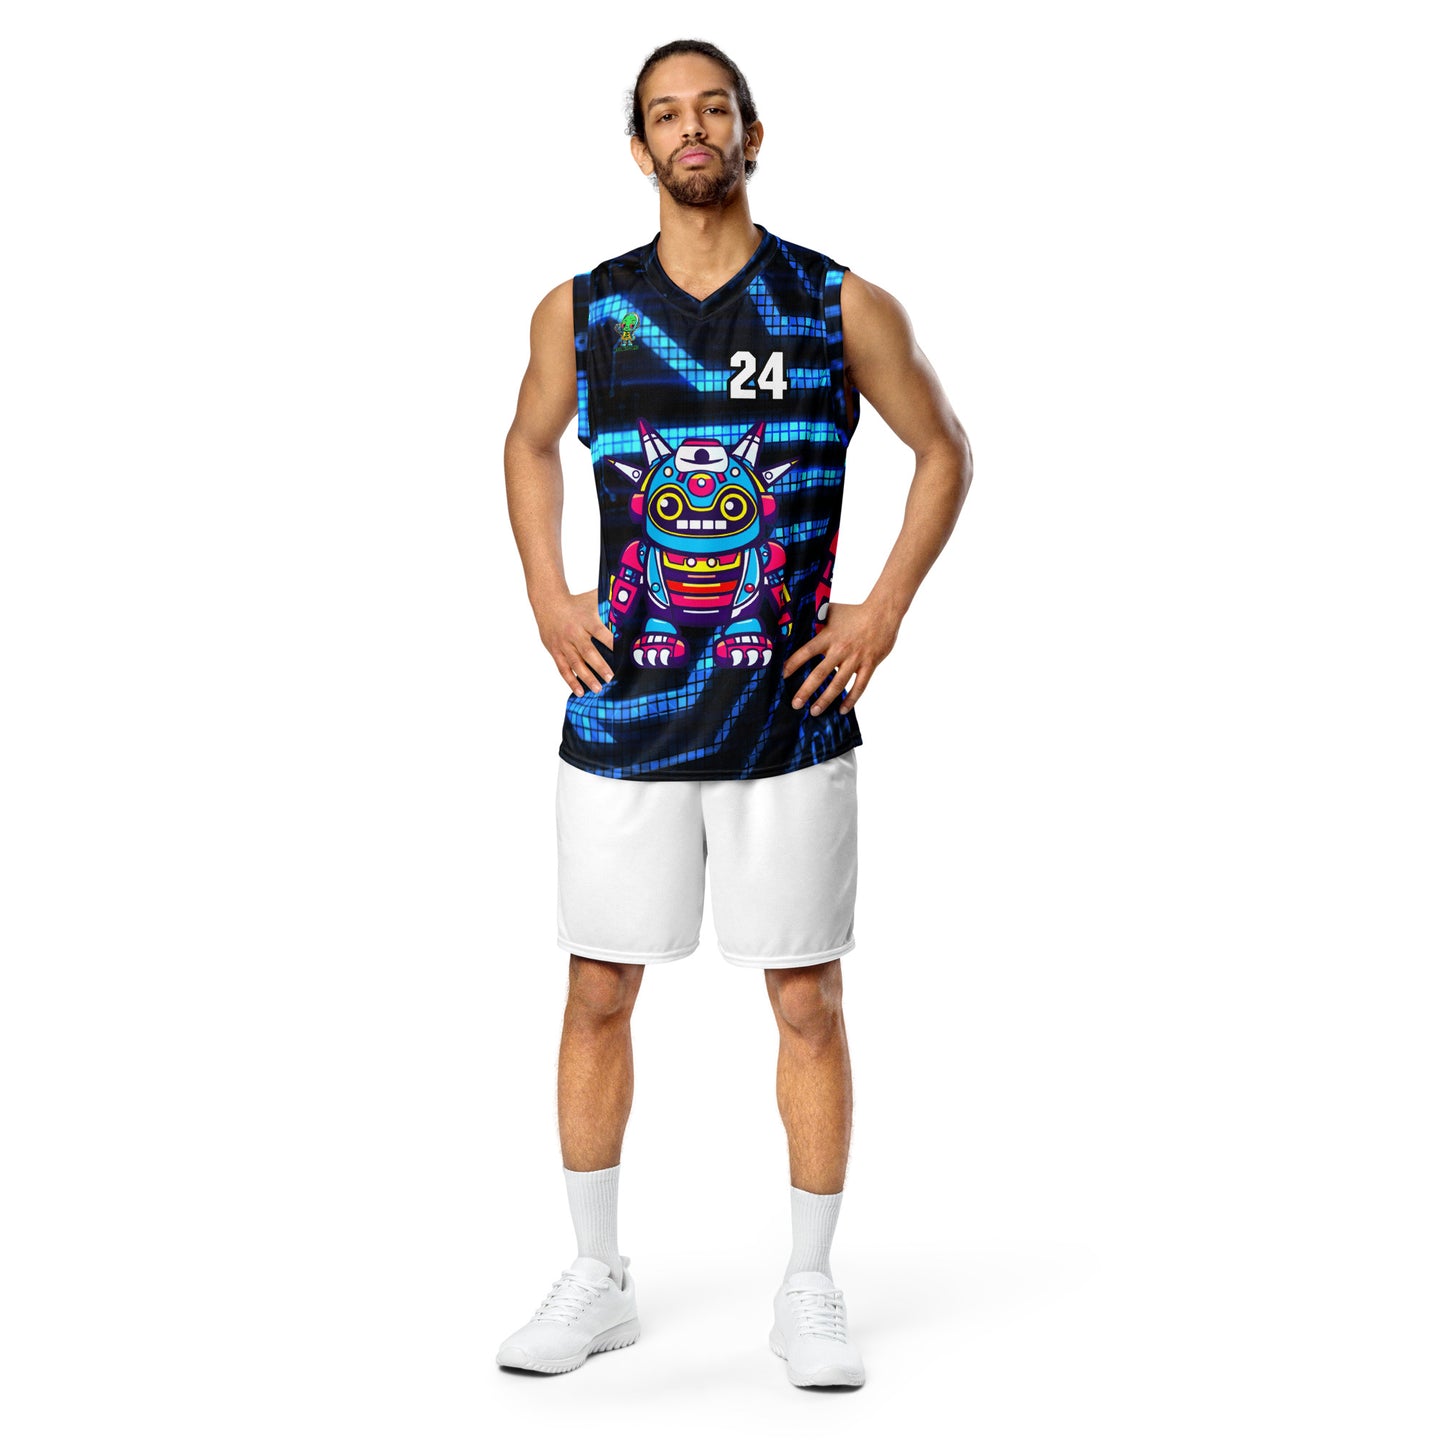 Techno Guardian - Recycled unisex basketball jersey - Digital Pulse Colorway